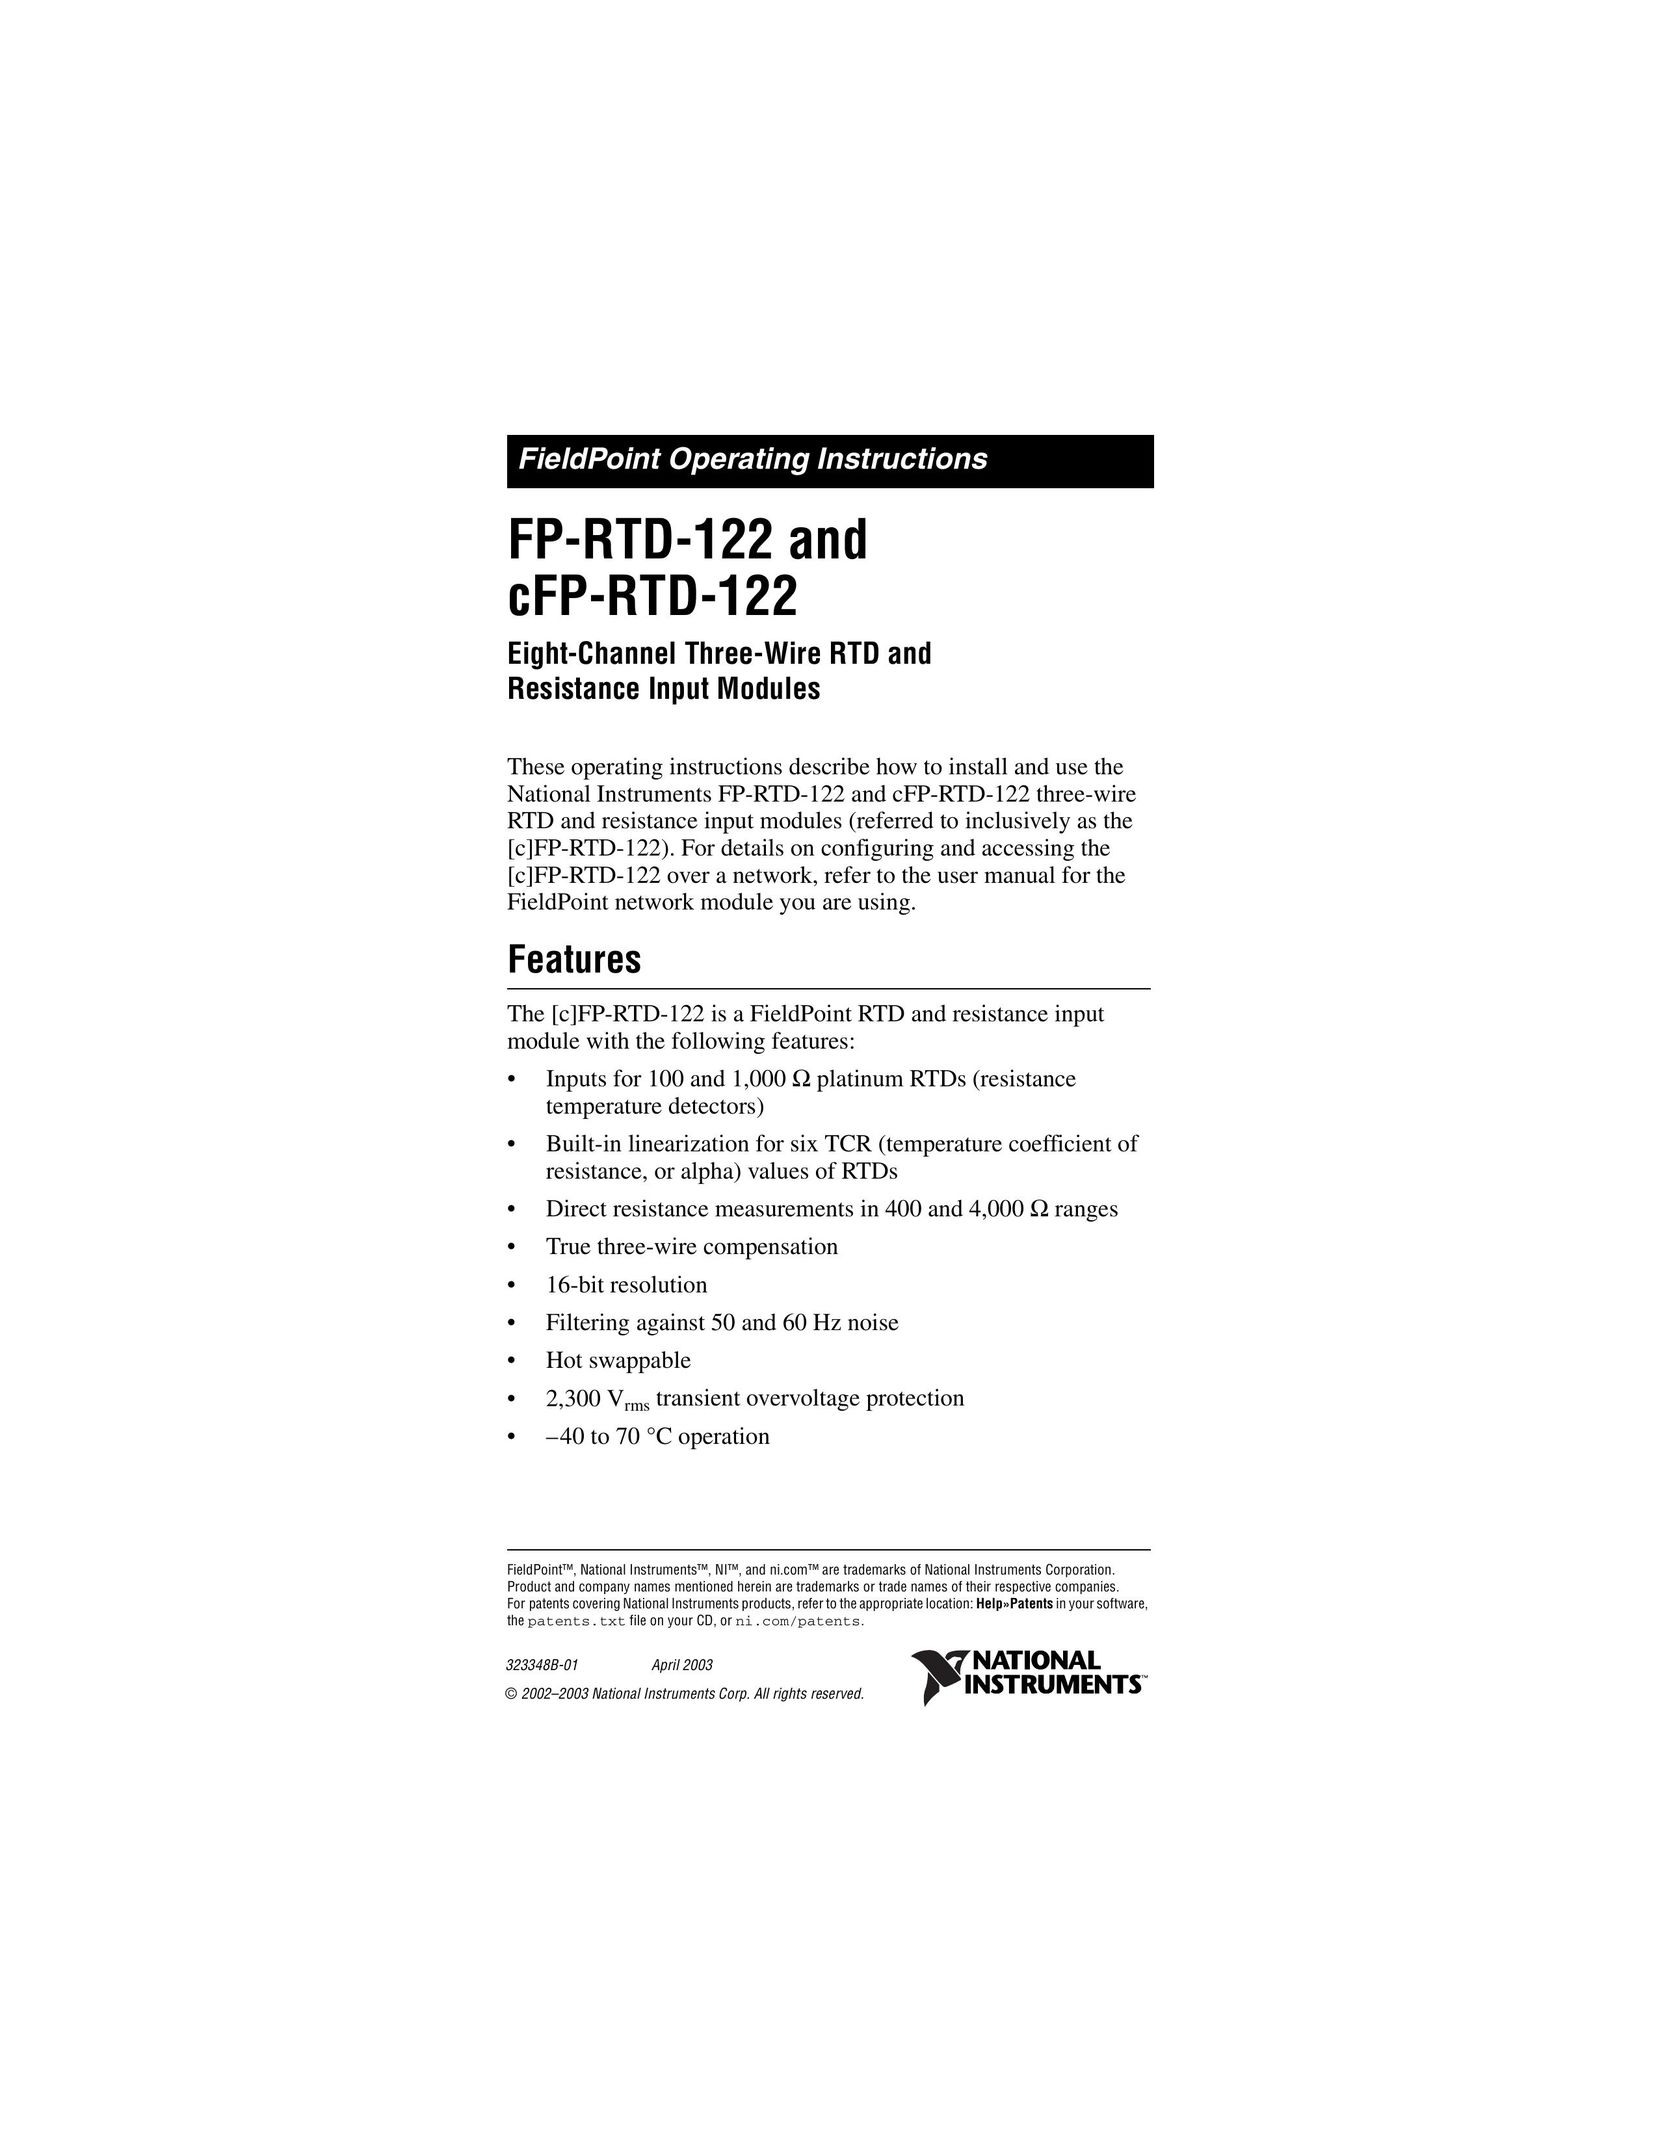 National Instruments FP-RTD-122 Network Router User Manual